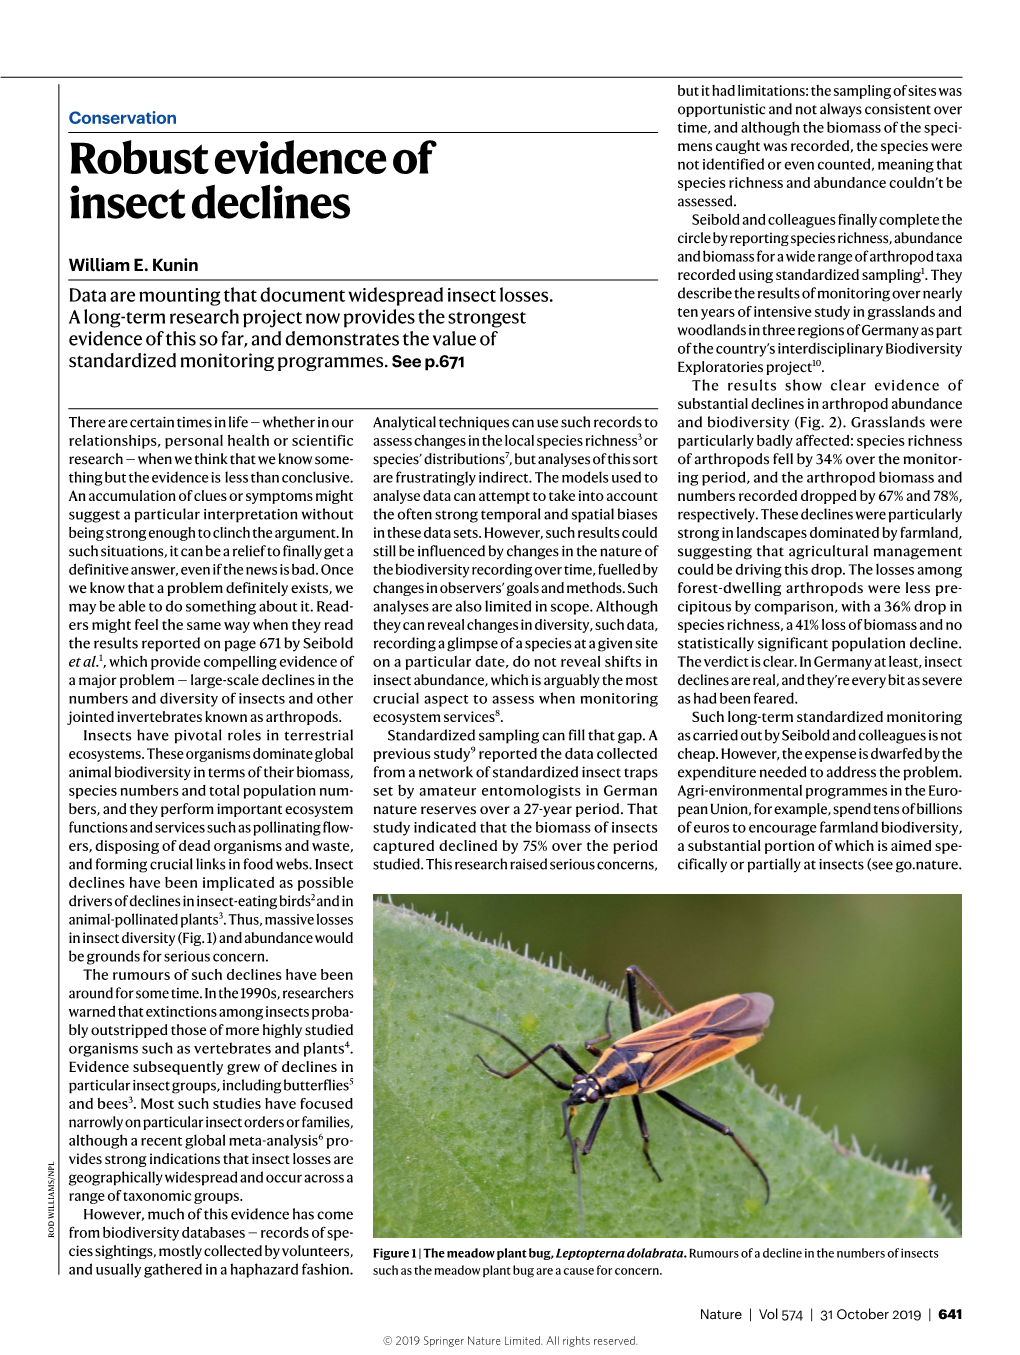 Robust Evidence of Insect Declines